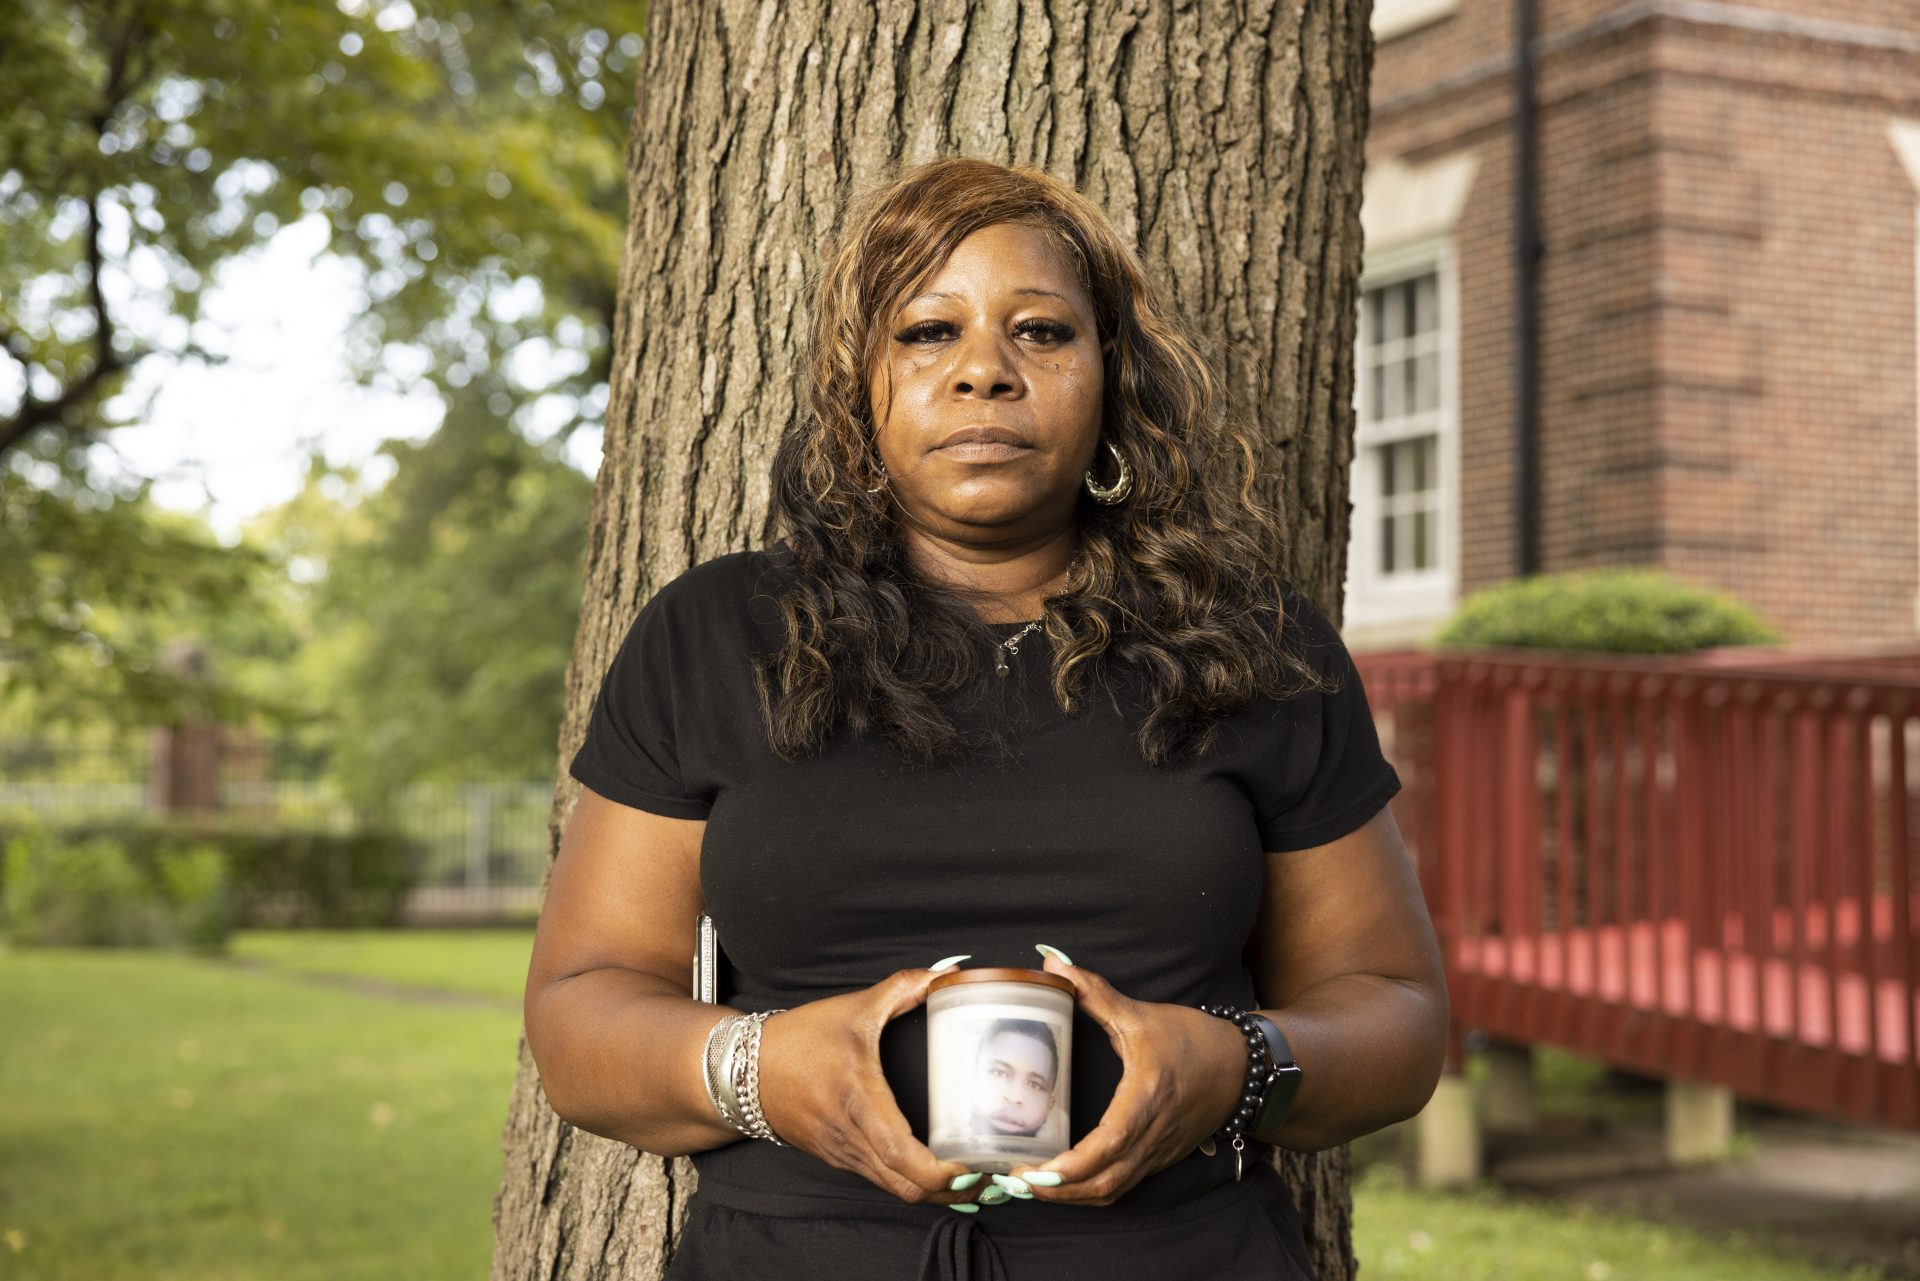 Shineka Crawford stands outside the Prince Hall Grand Lodge in Philadelphia on Monday, Aug. 23, 2021, where she came to drop off a memento of her son, Shaquille Barbour, 18, to The Gun Violence Memorial Project. Shaquille was shot 13 times and killed while riding his bike.